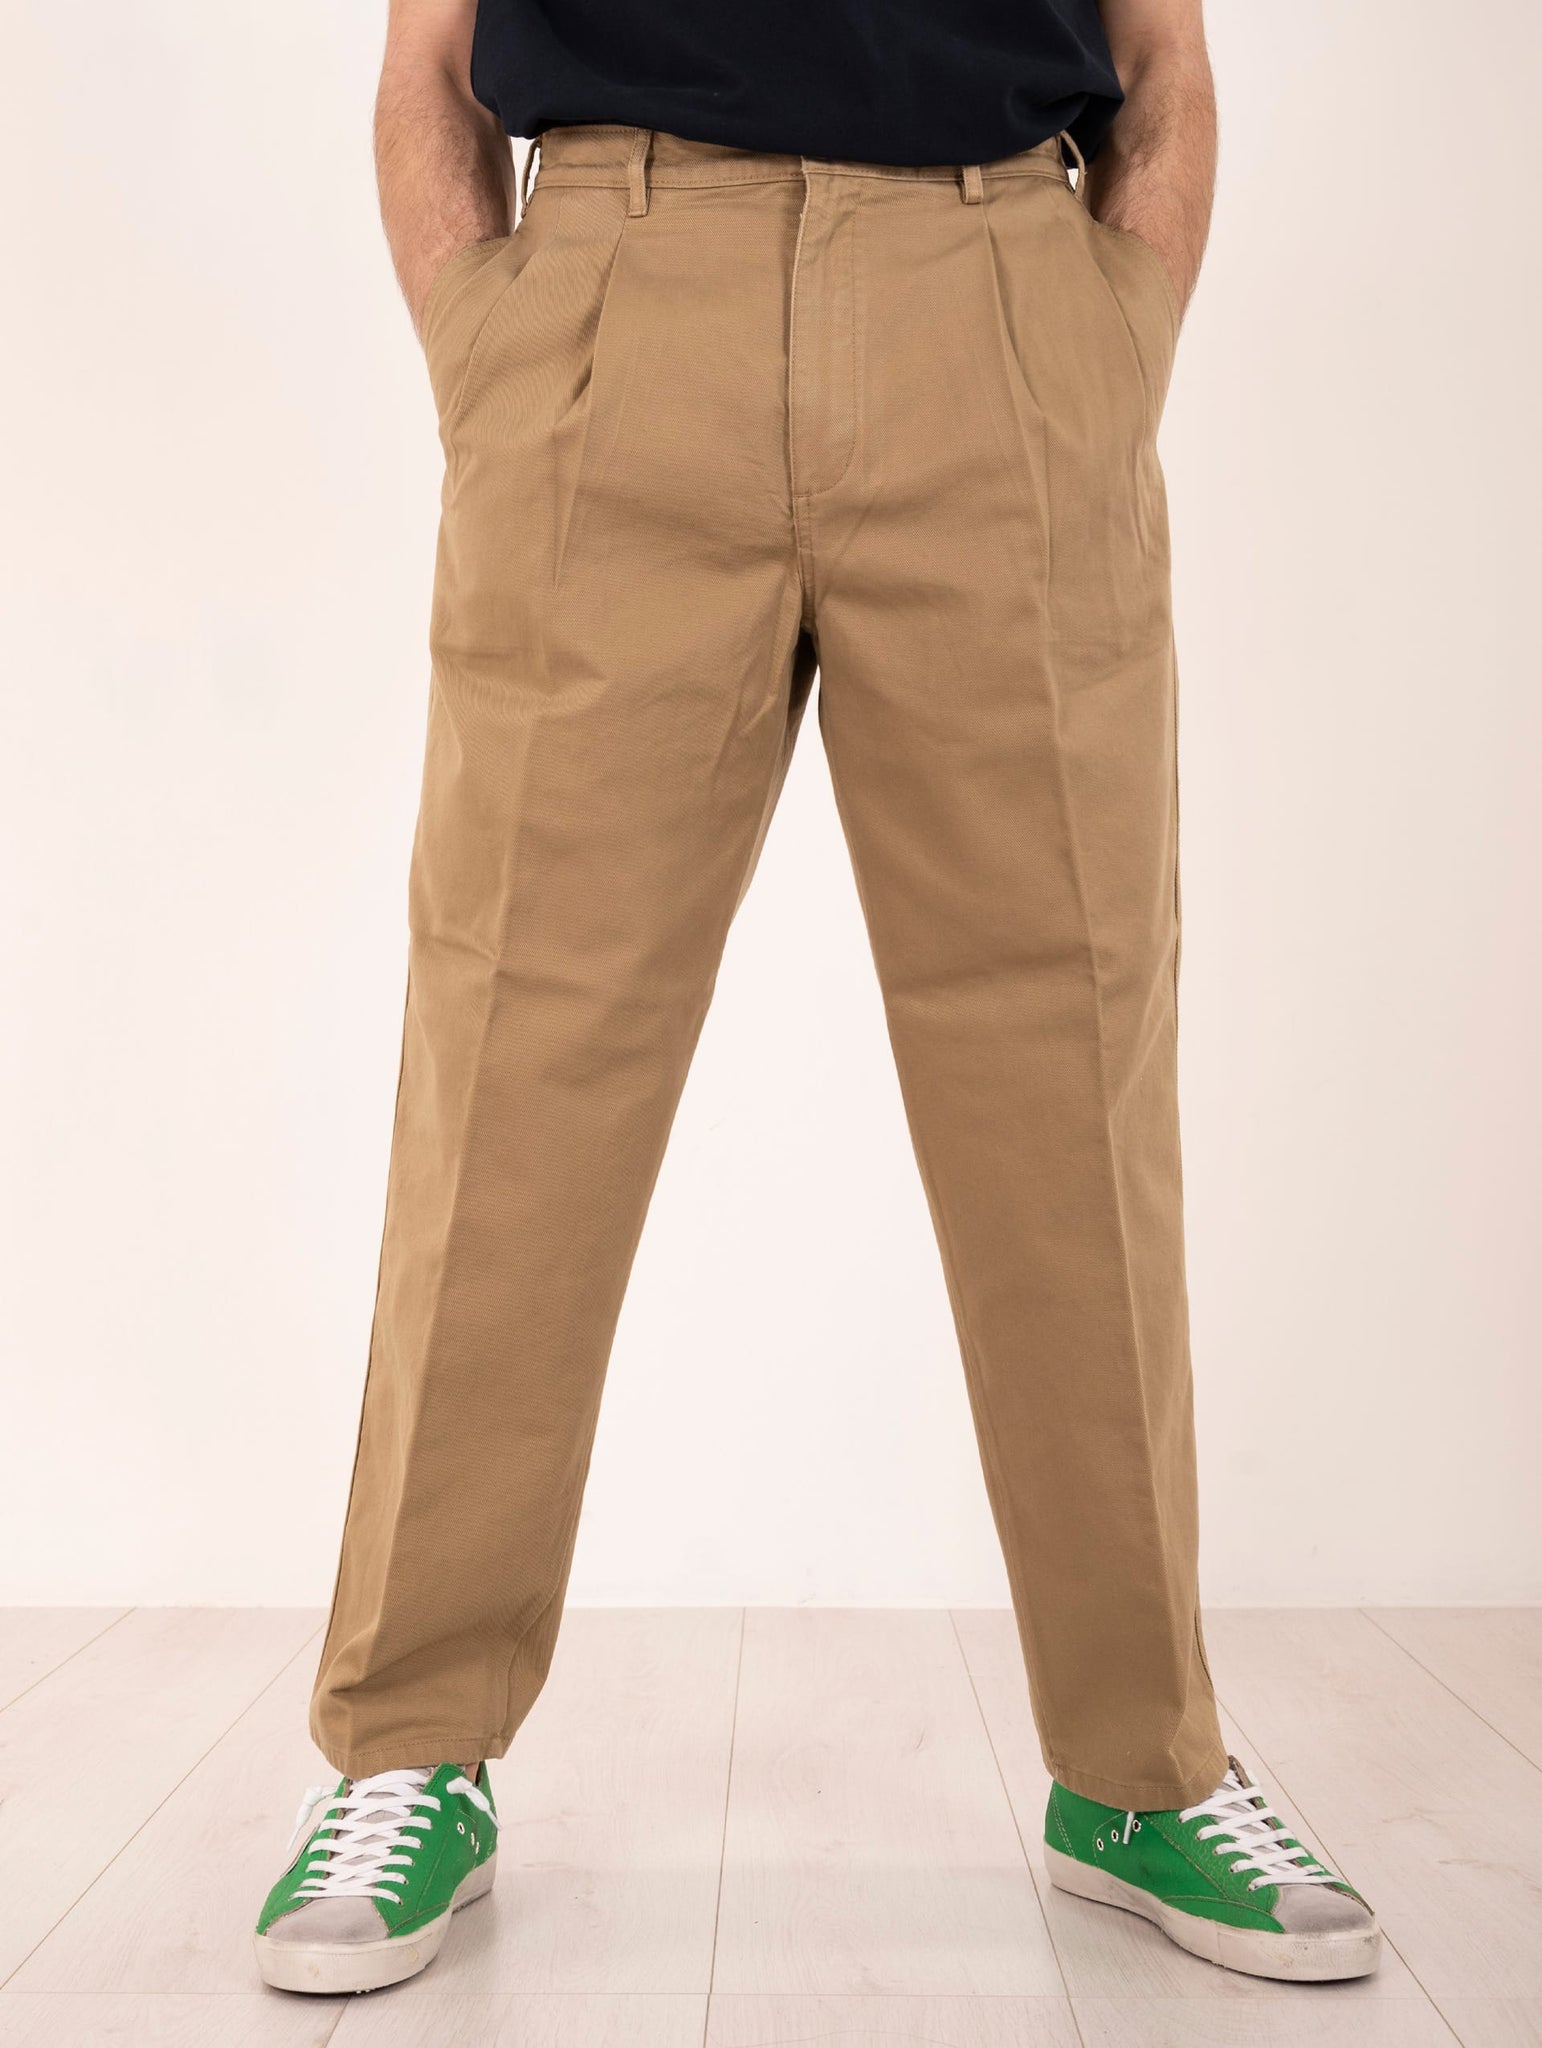 Pantalone Relaxed Dockers in Cotone Riciclato Biege